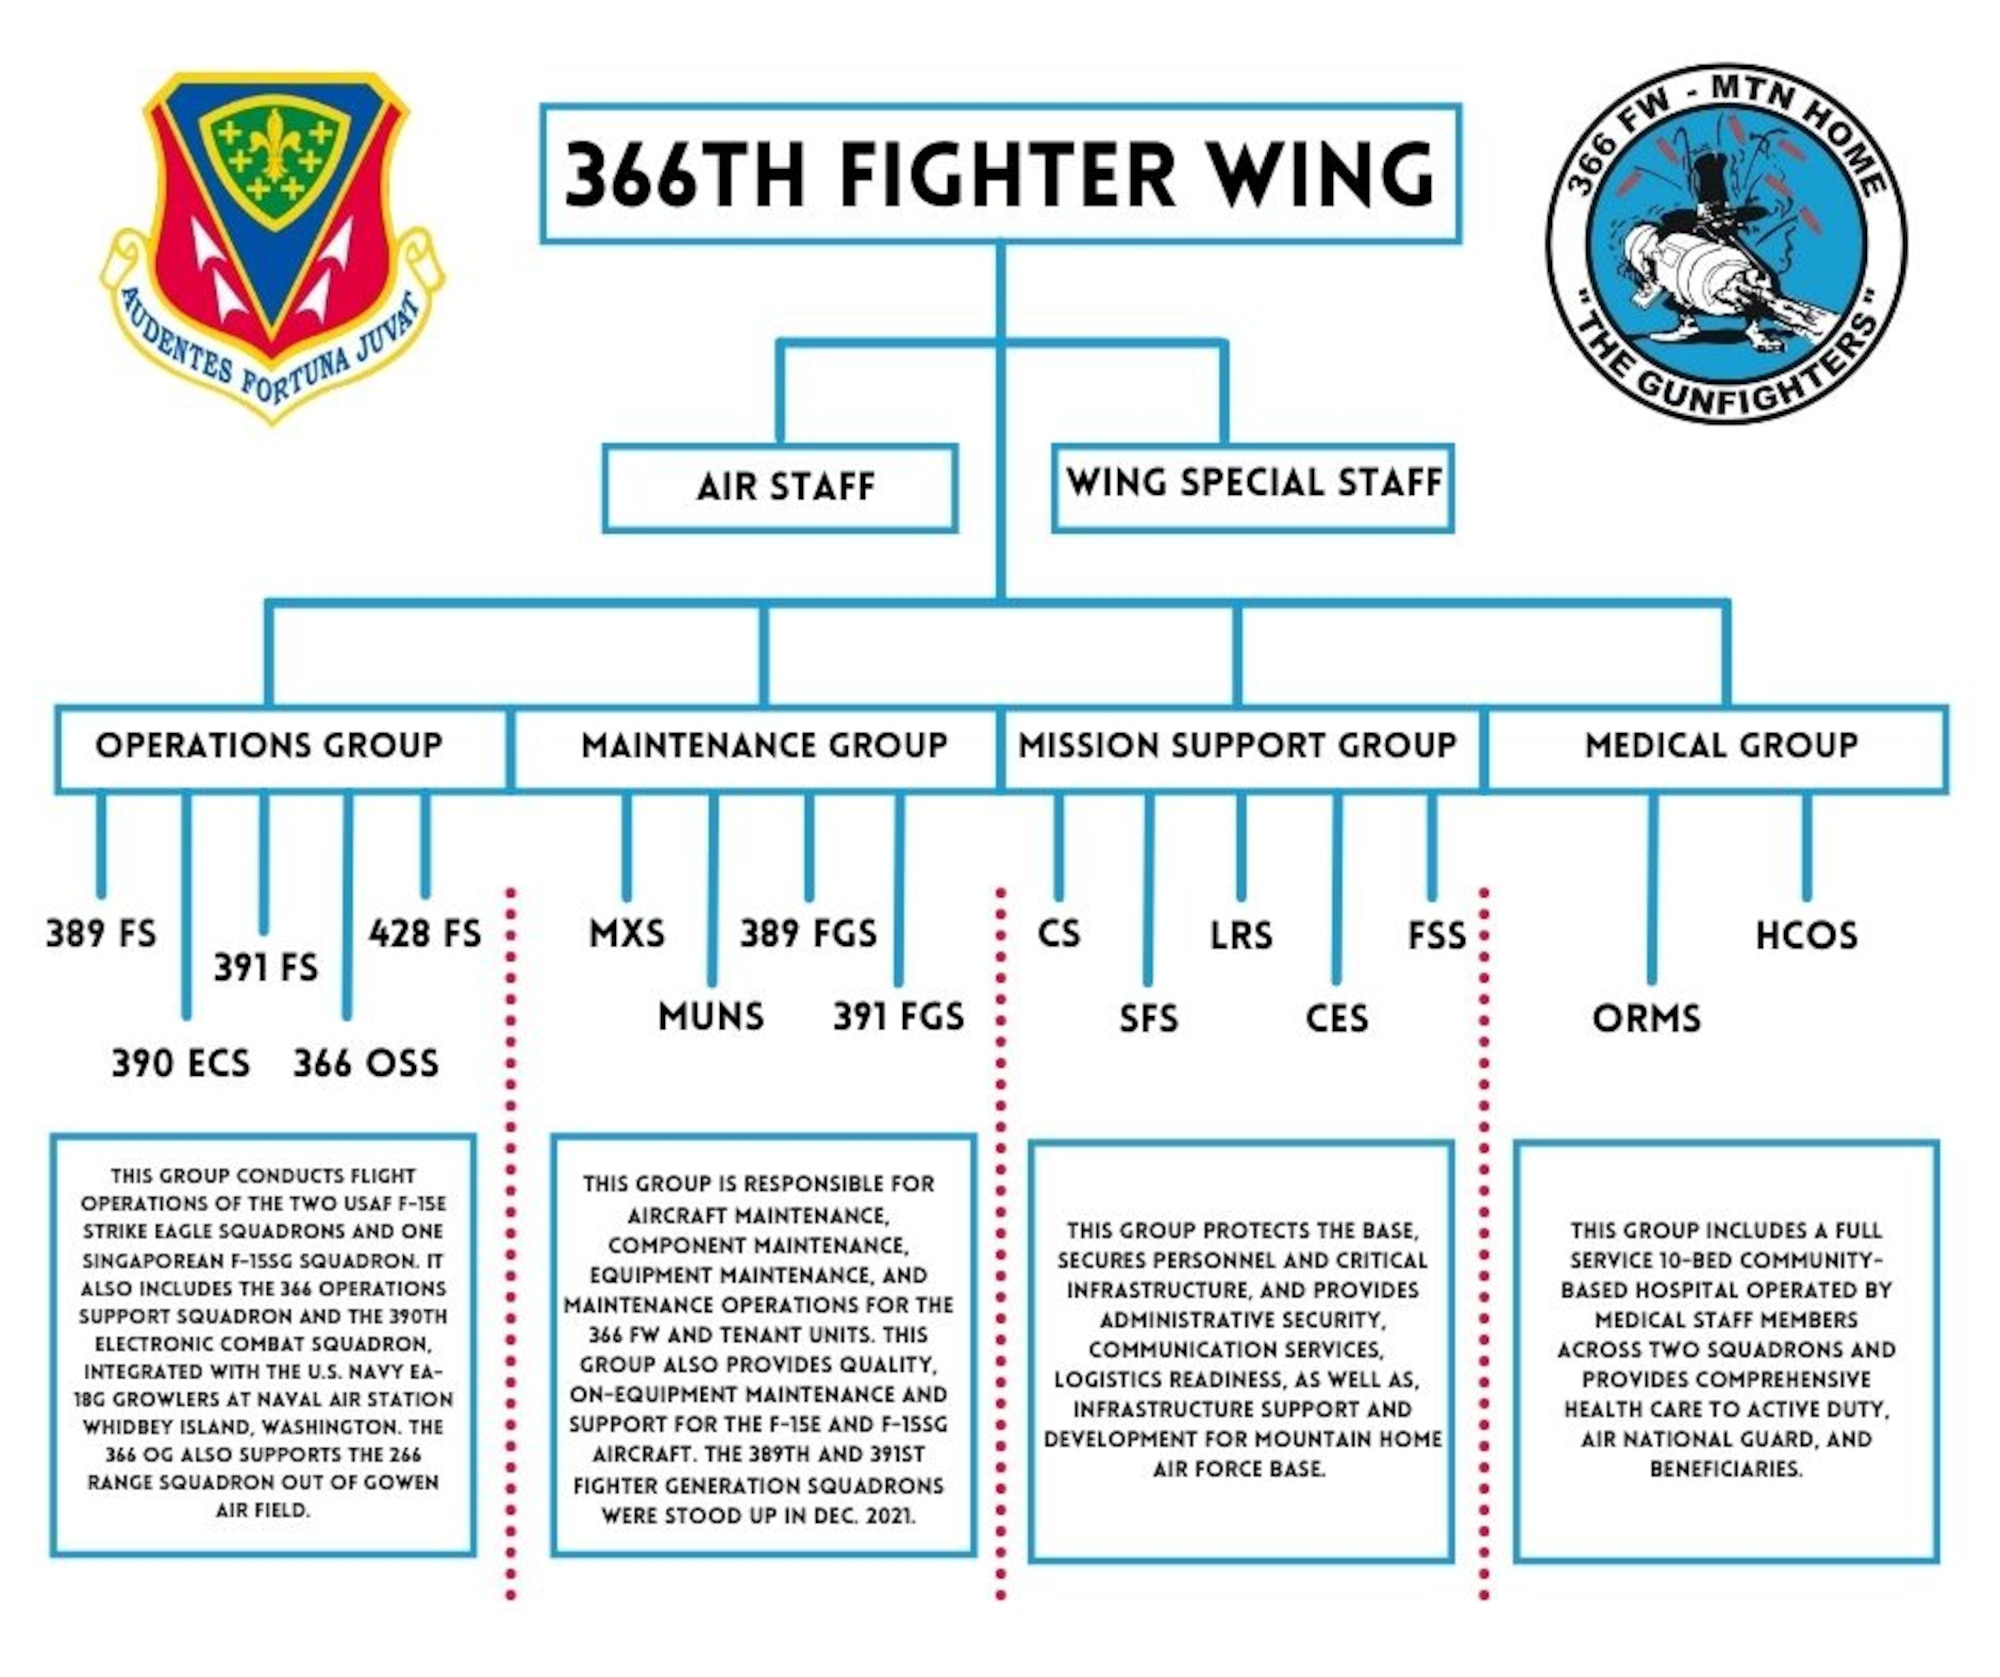 This is a graphic of the 366th Fighter Wing organizational structure when it includes groups and A-Staff in line with the Combat Air force Force Generation model.